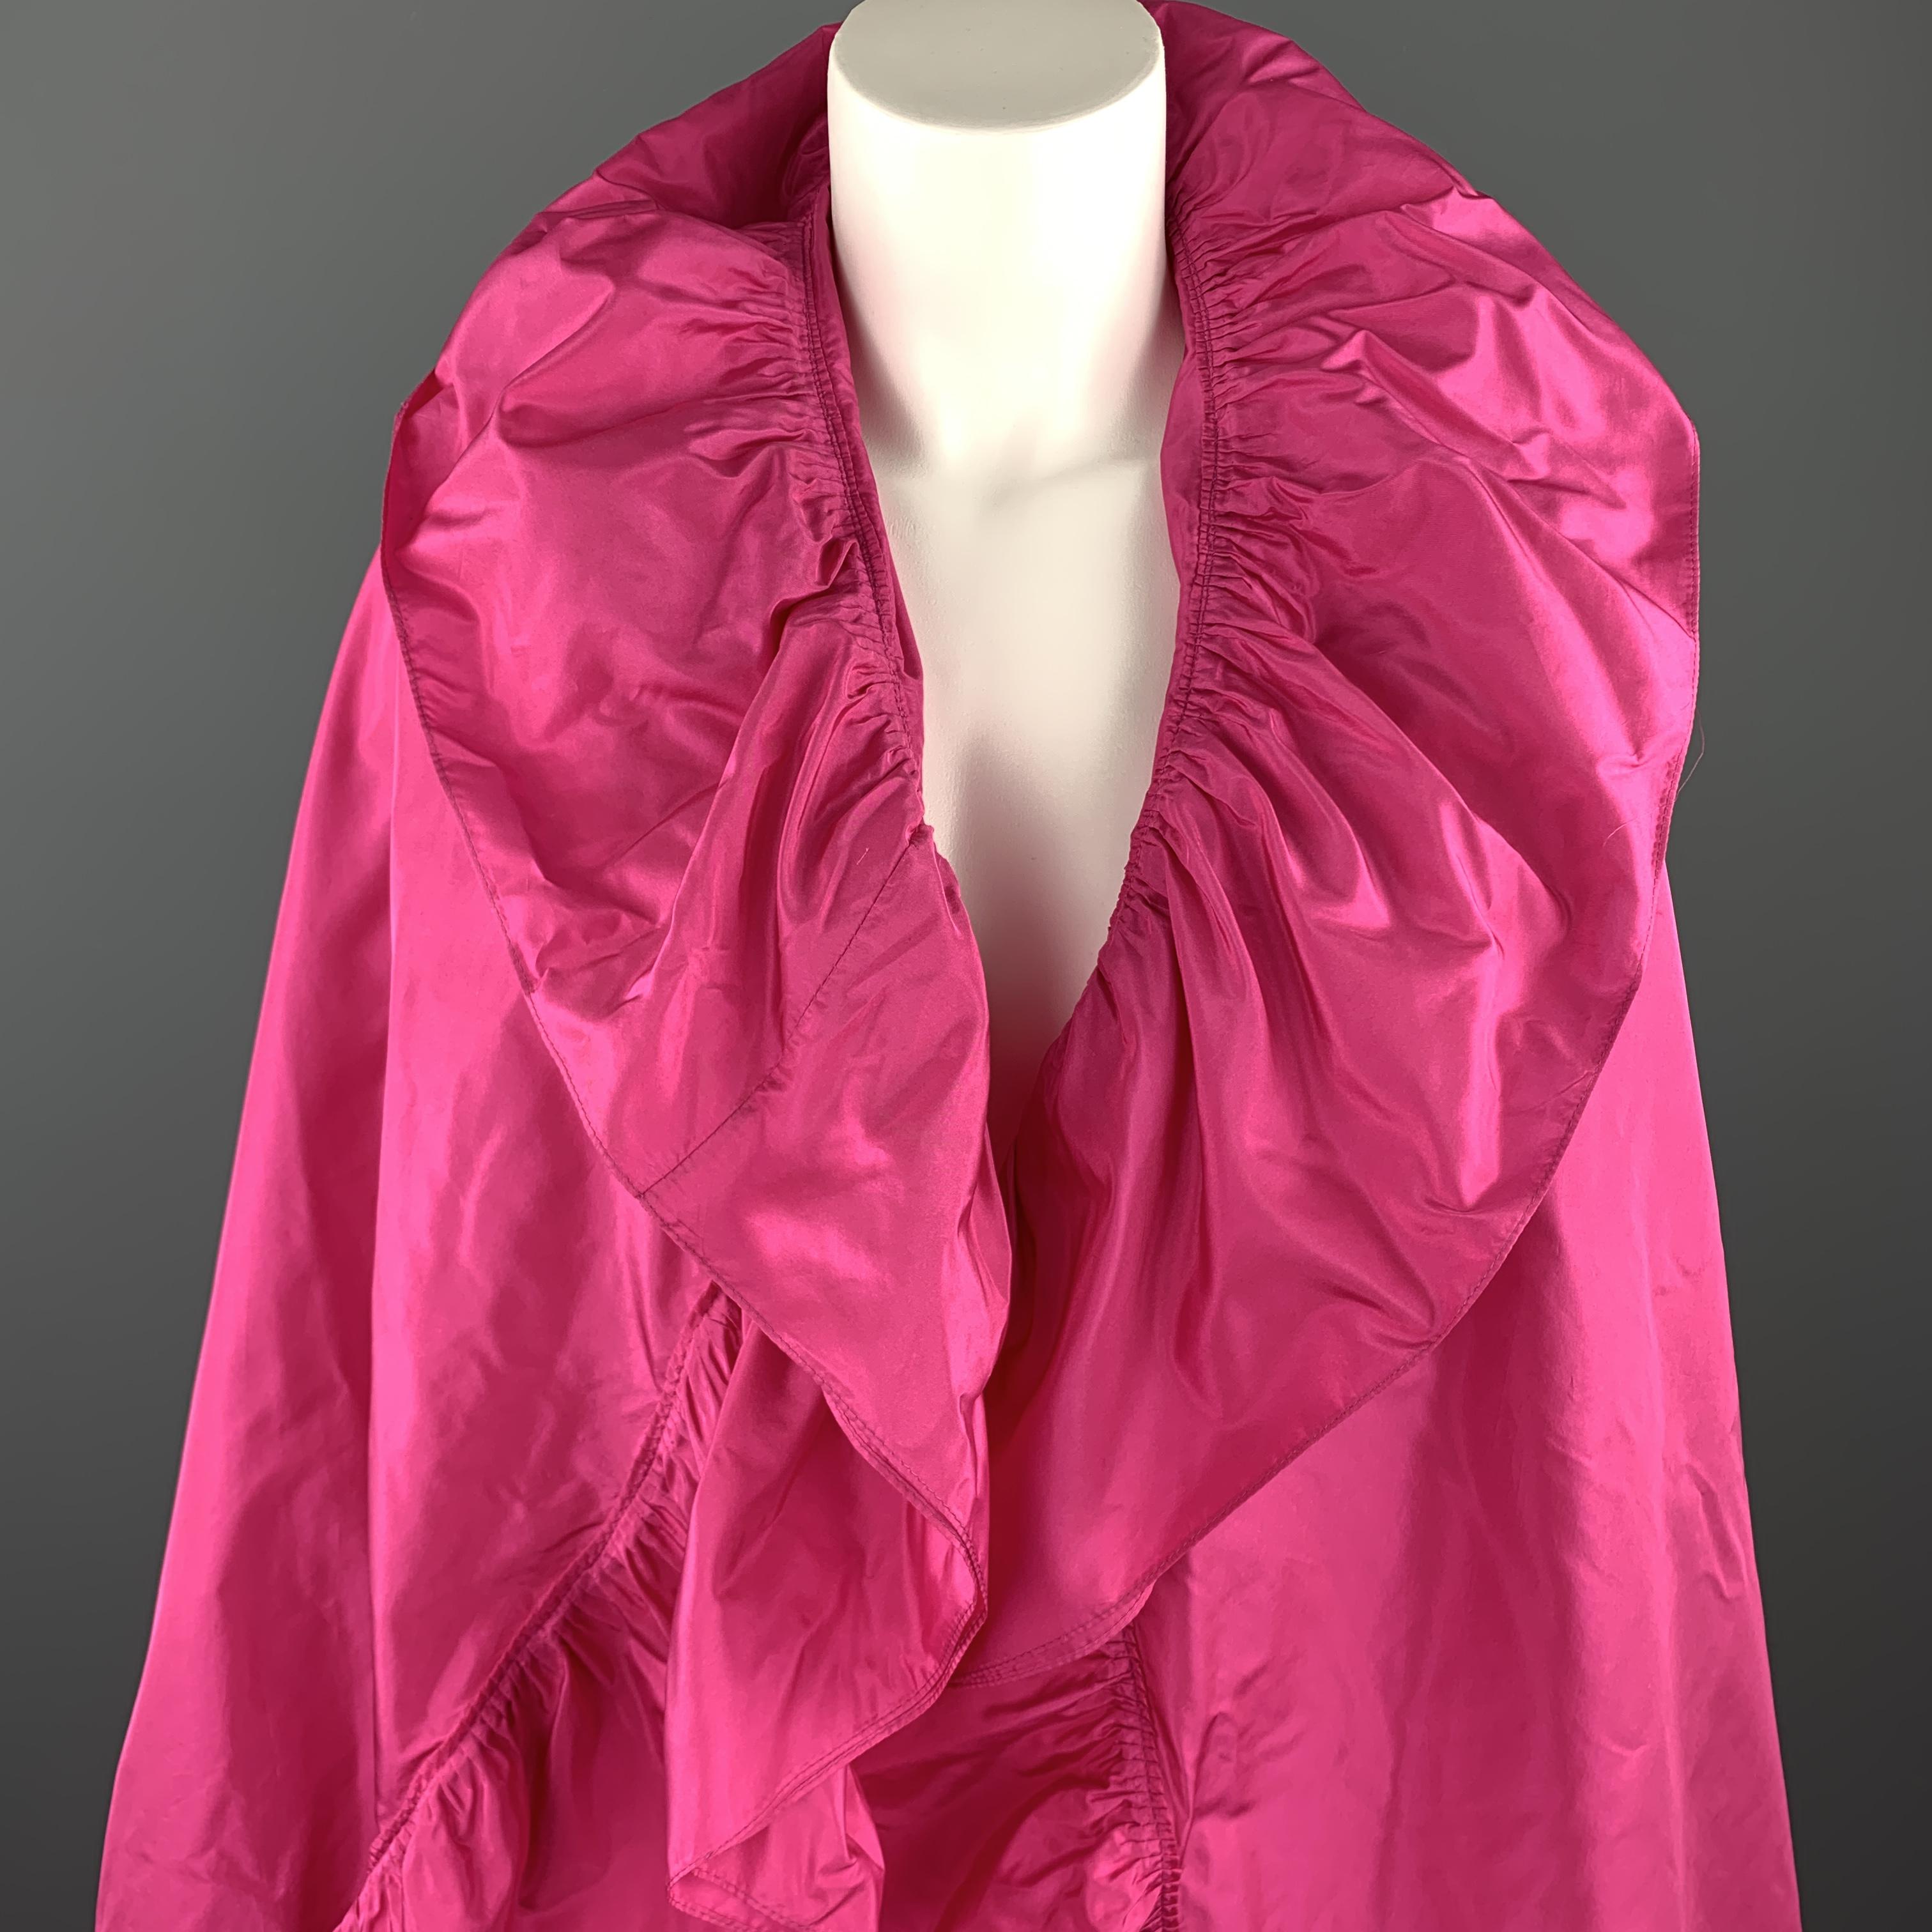 Vintage 1970's CHRISTIAN DIOR BOUTIQUE evening shawl comes in bold fuchsia silk taffeta with a pleat gathered ruffle trim. Made in Italy.

Excellent Pre-Owned Condition.

Length: 81 in.
Width: 54 in. 